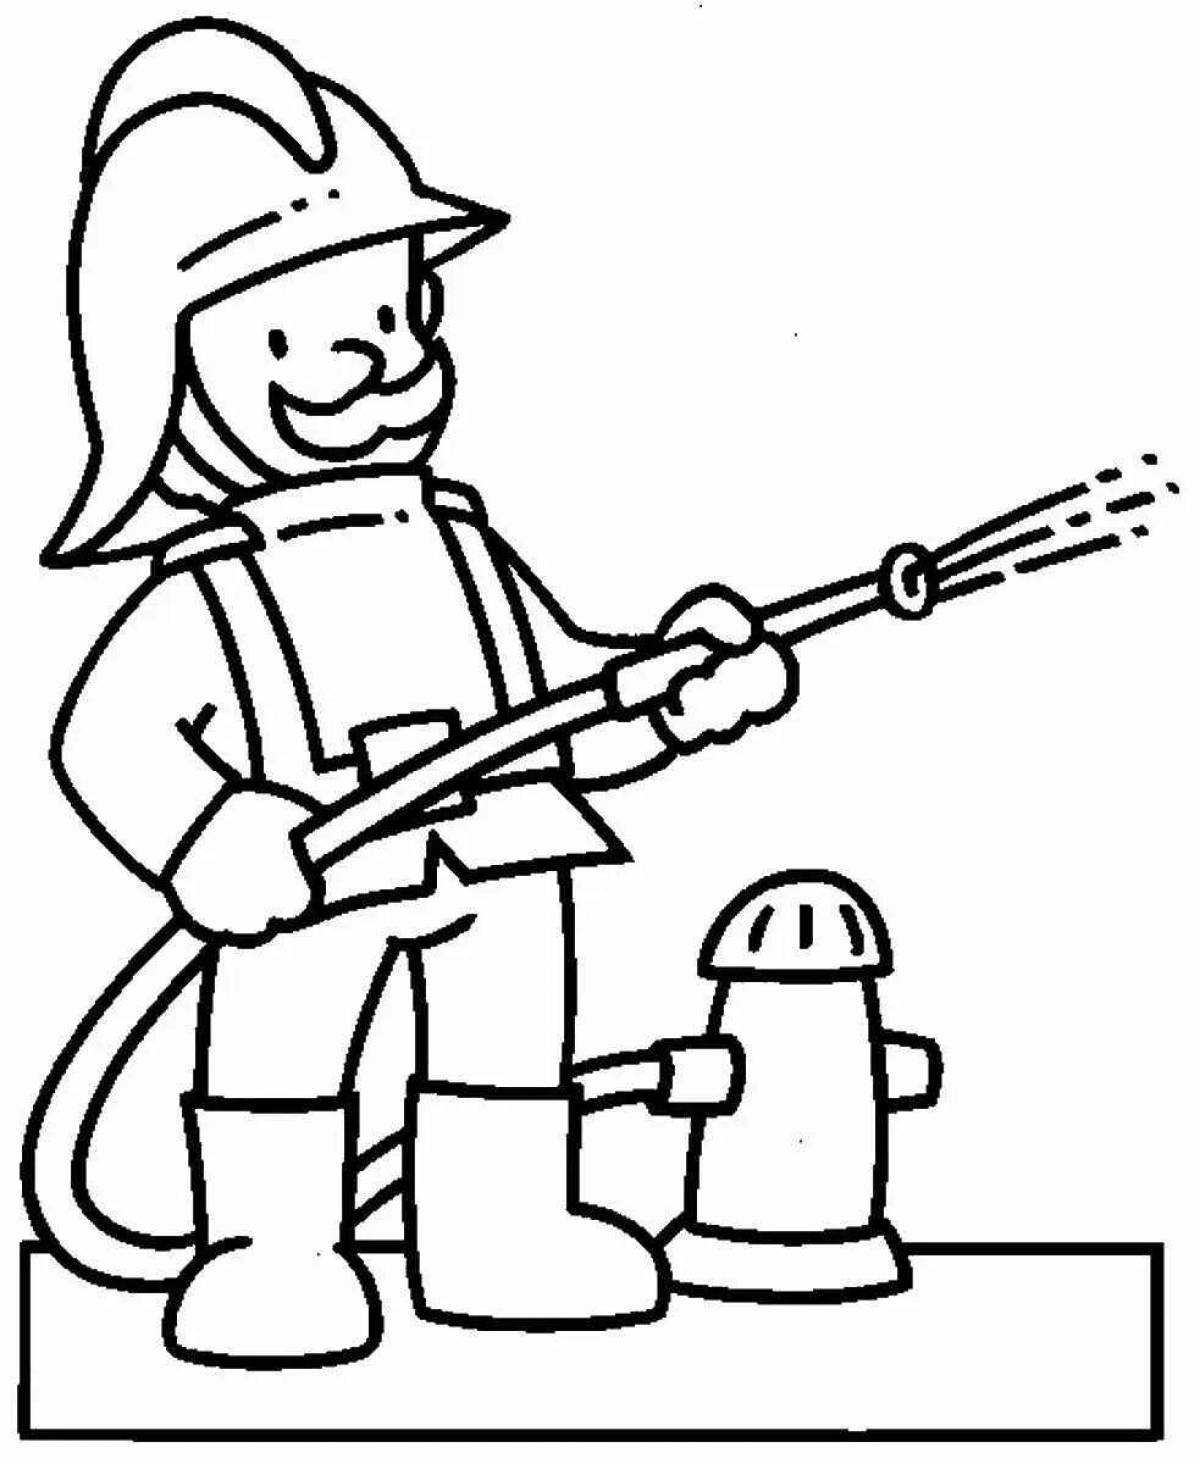 Colorful firefighter profession coloring page